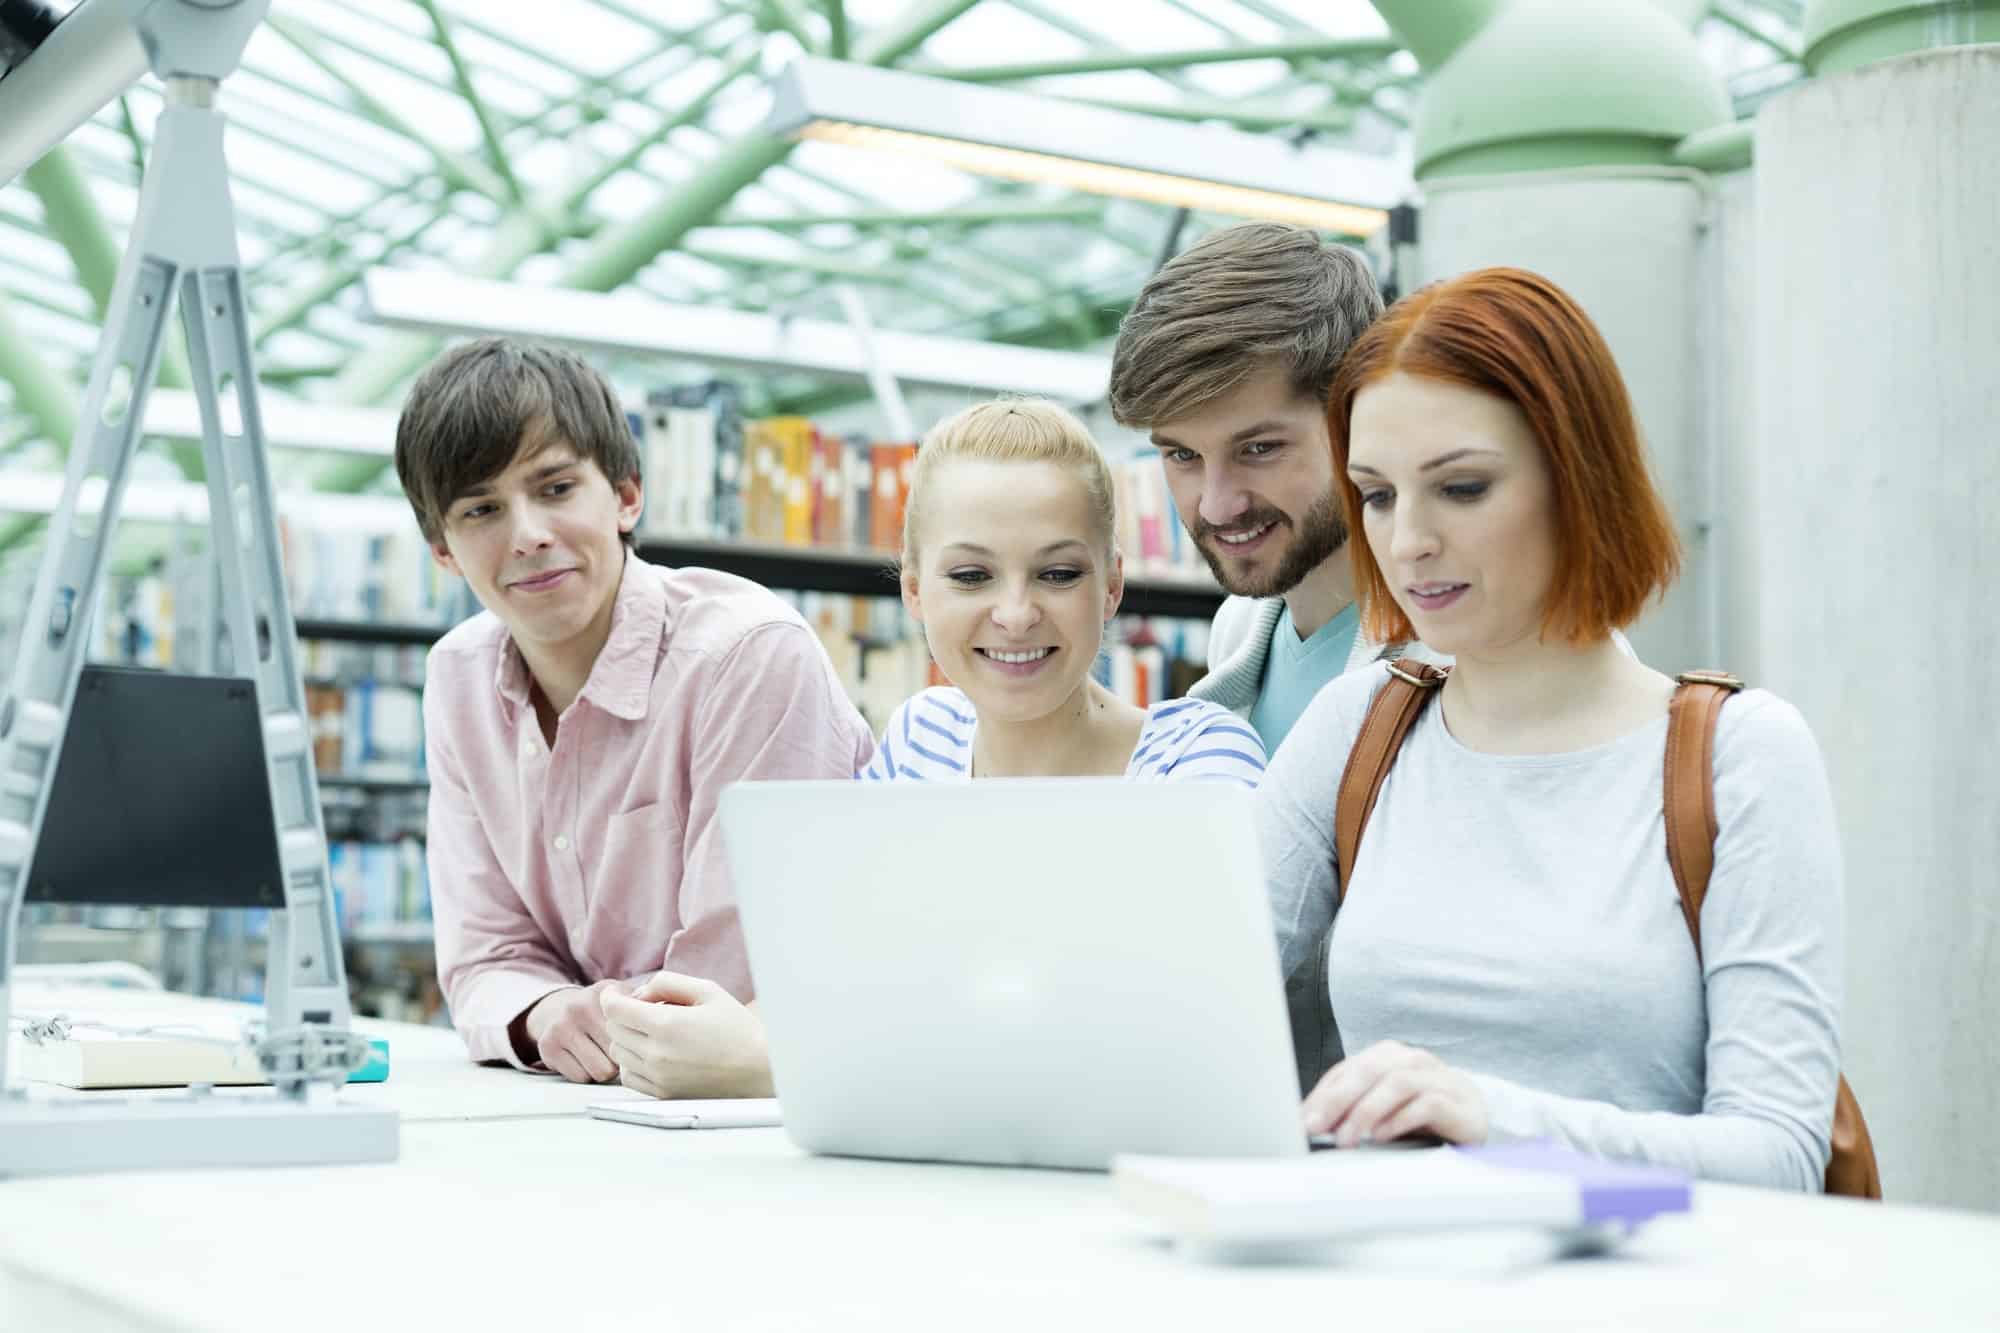 students in a university library using laptop